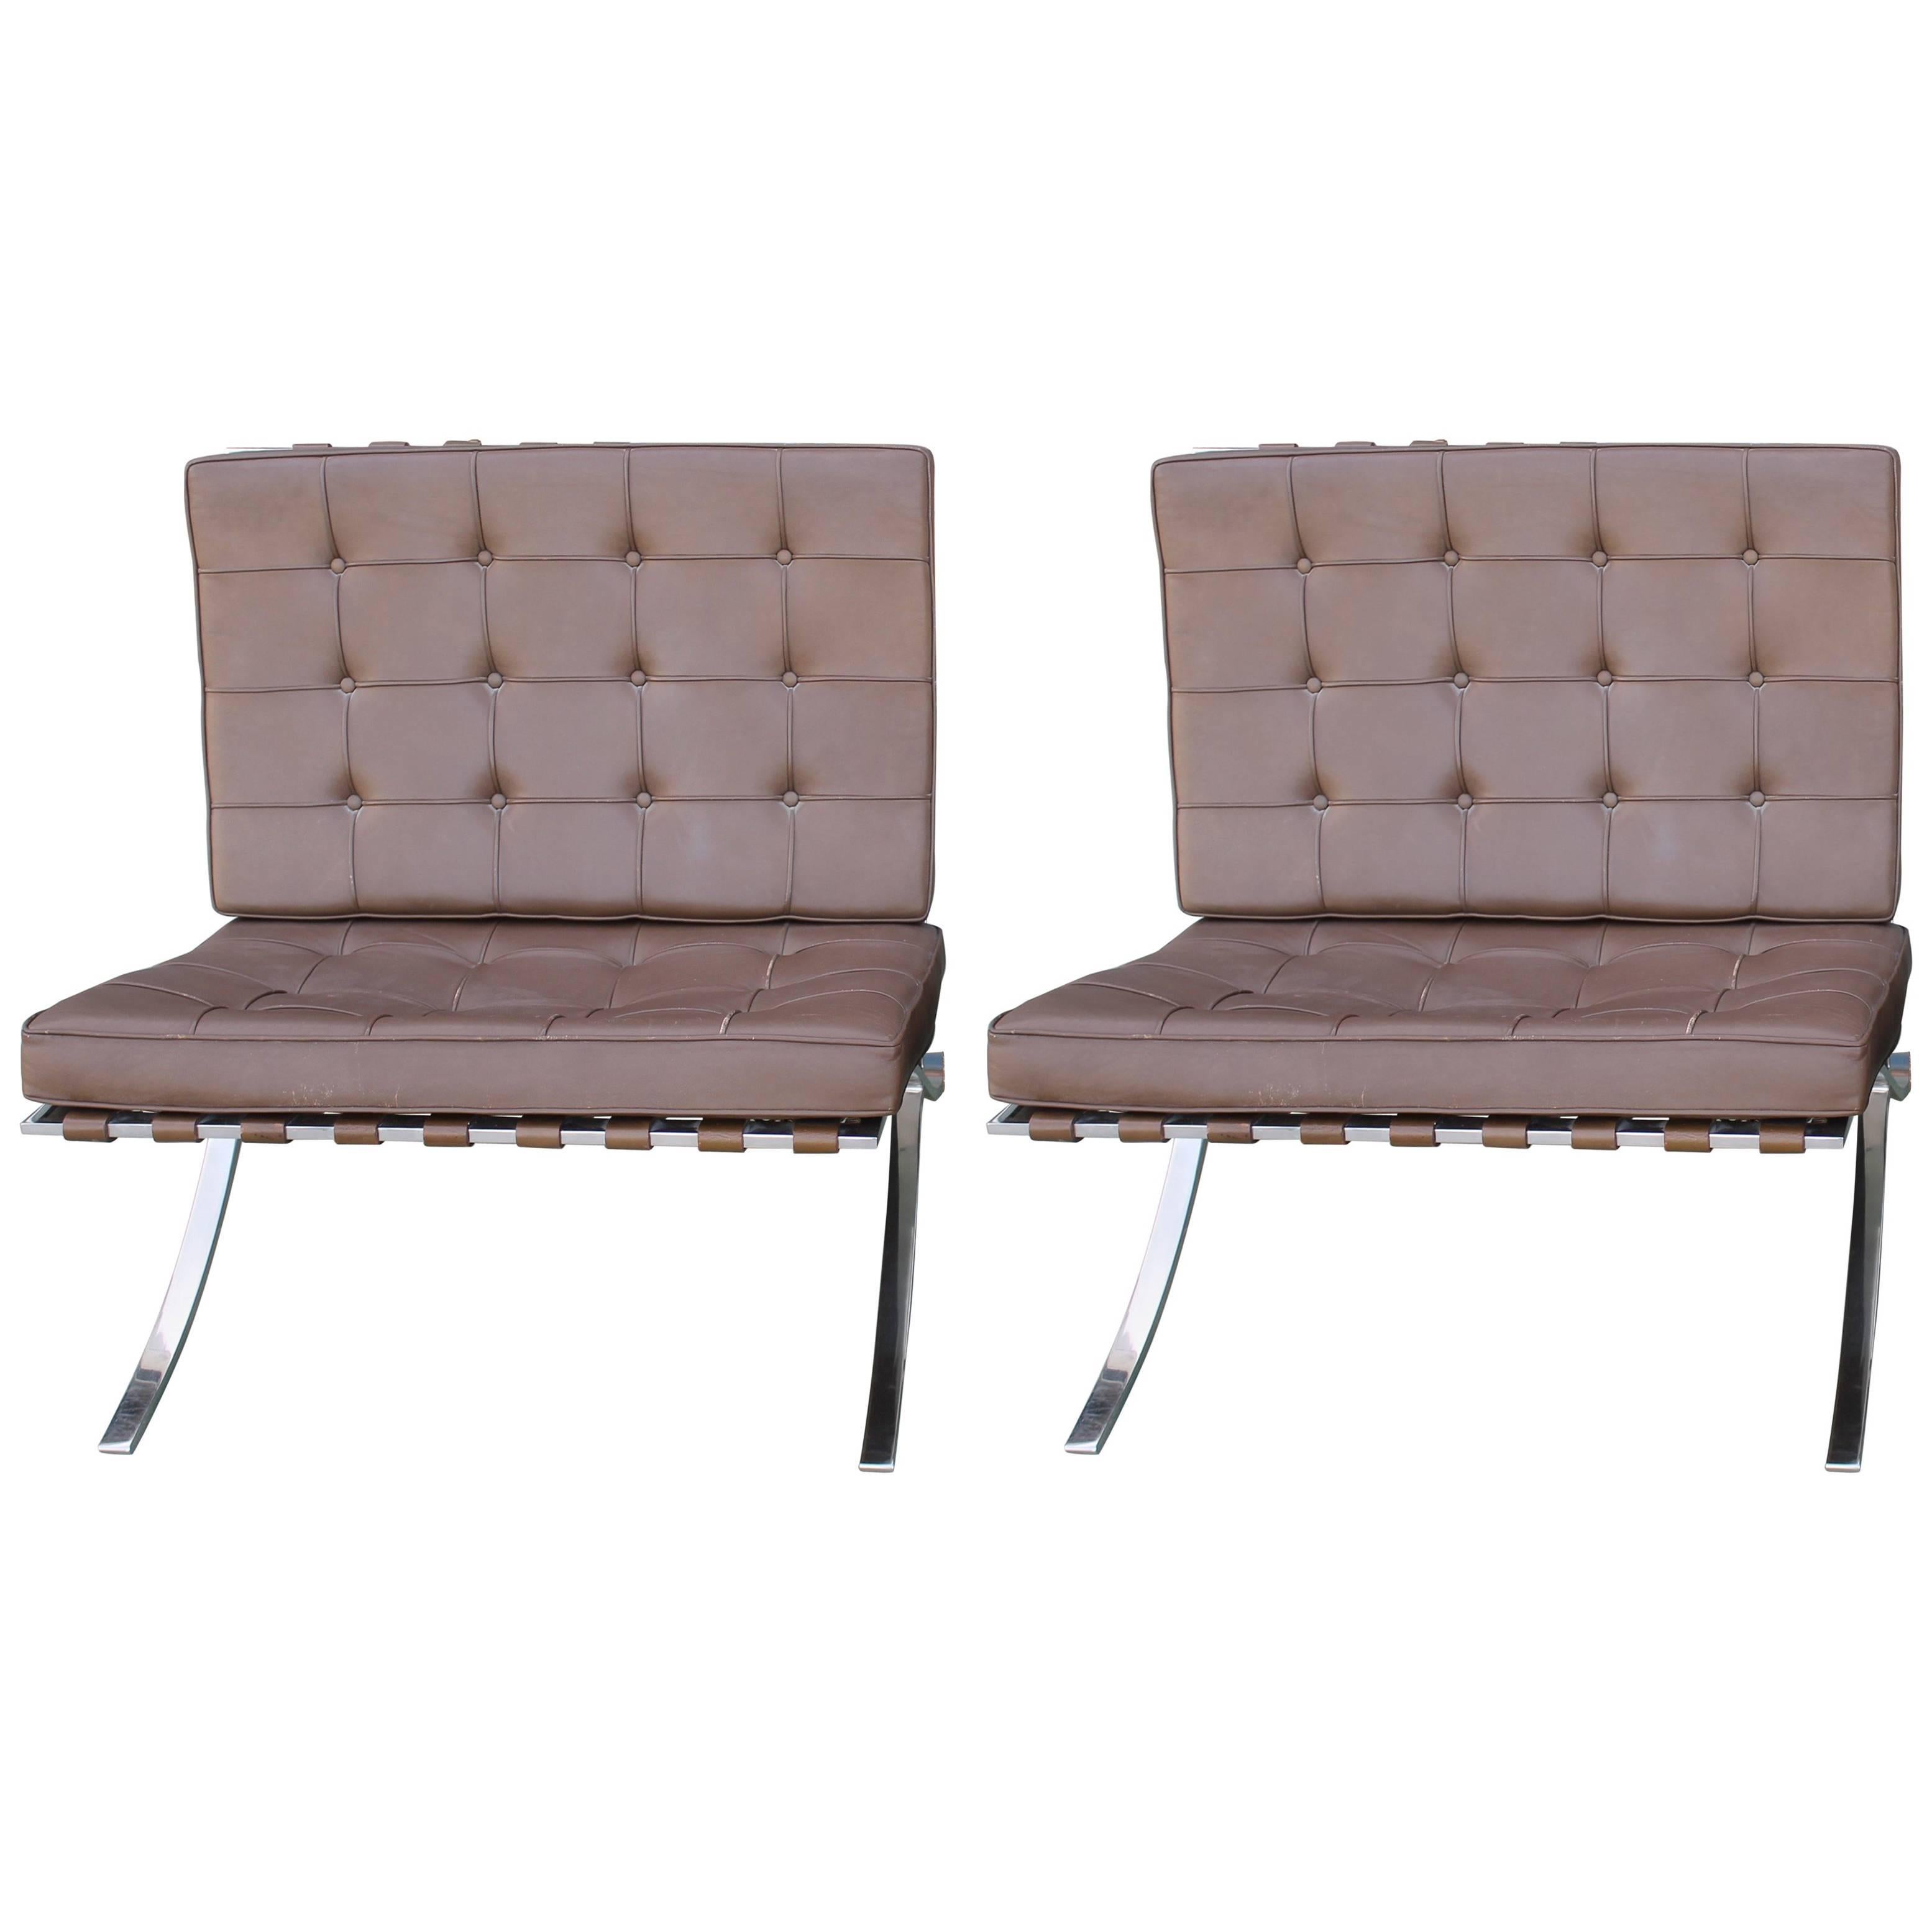 Pair of Mies van der Rohe Knoll Barcelona Chairs